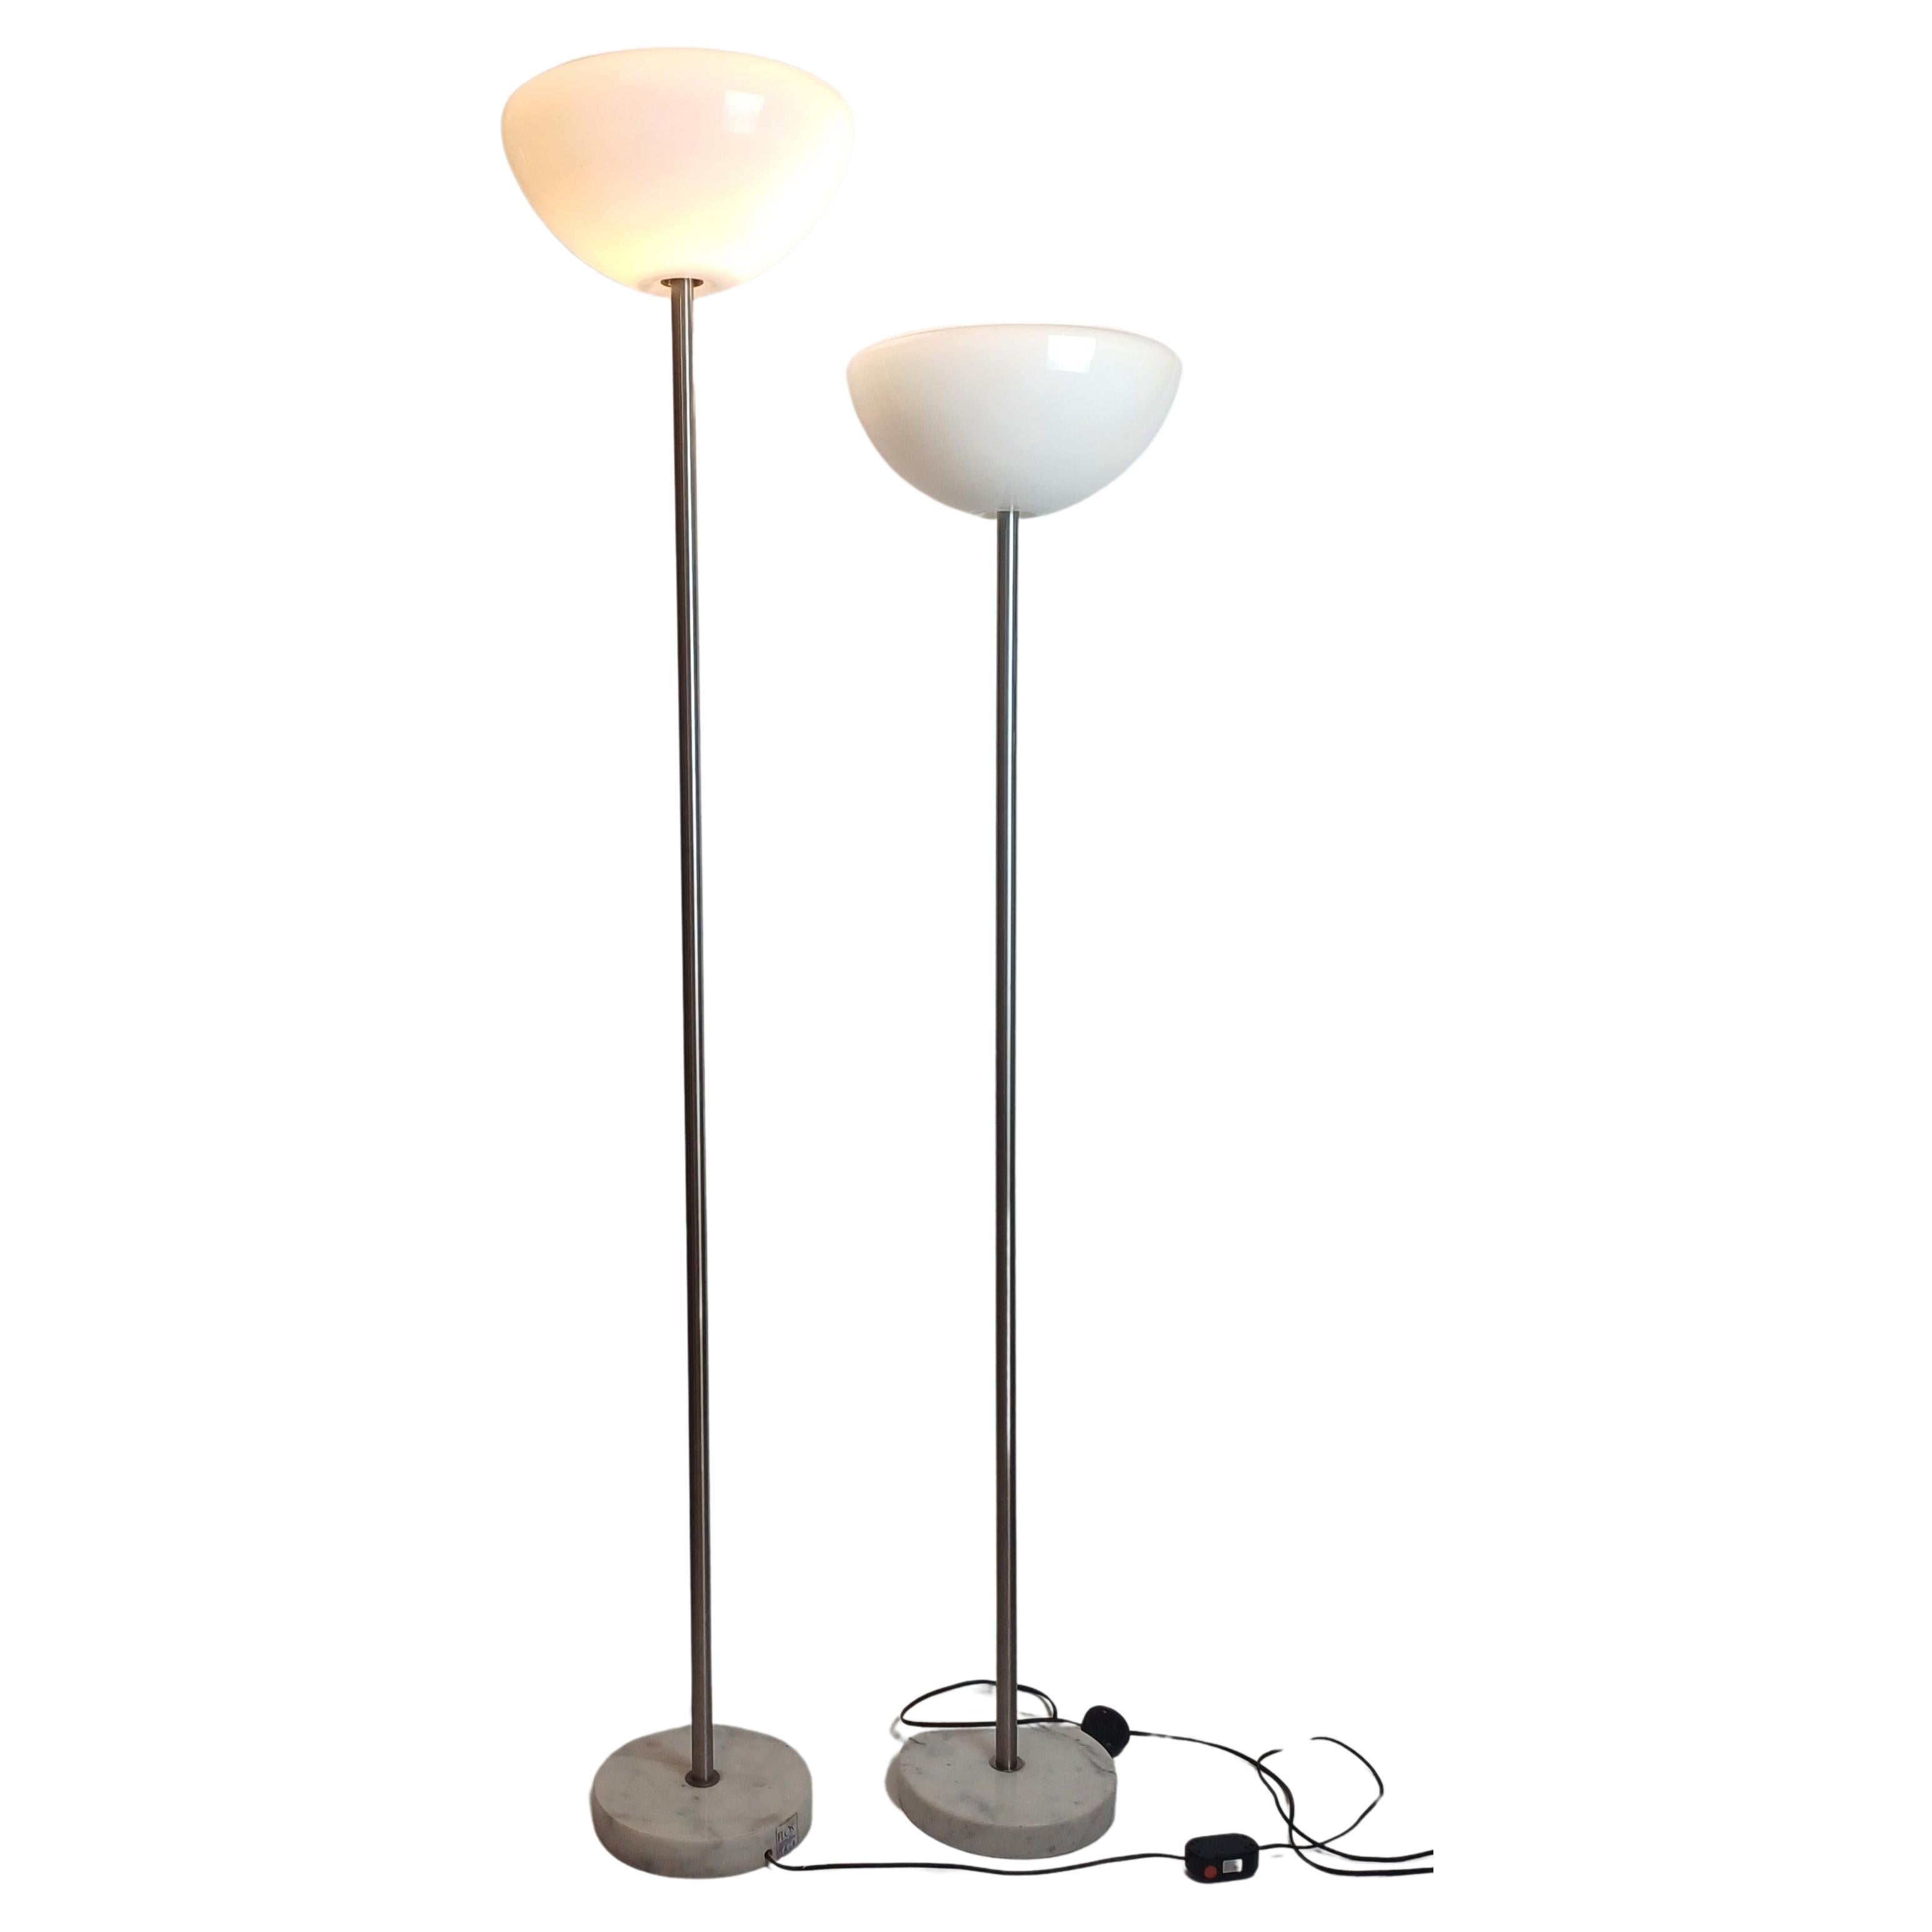 Floor lamps, set of 2, in glass and marble Poppy model designed by  Achille and Pier Giacomo Castiglioni for Flos, 1964. Floor lamps with marble base, steel stem and white opal glass diffuser. Produced by Flos based on a design by Achille